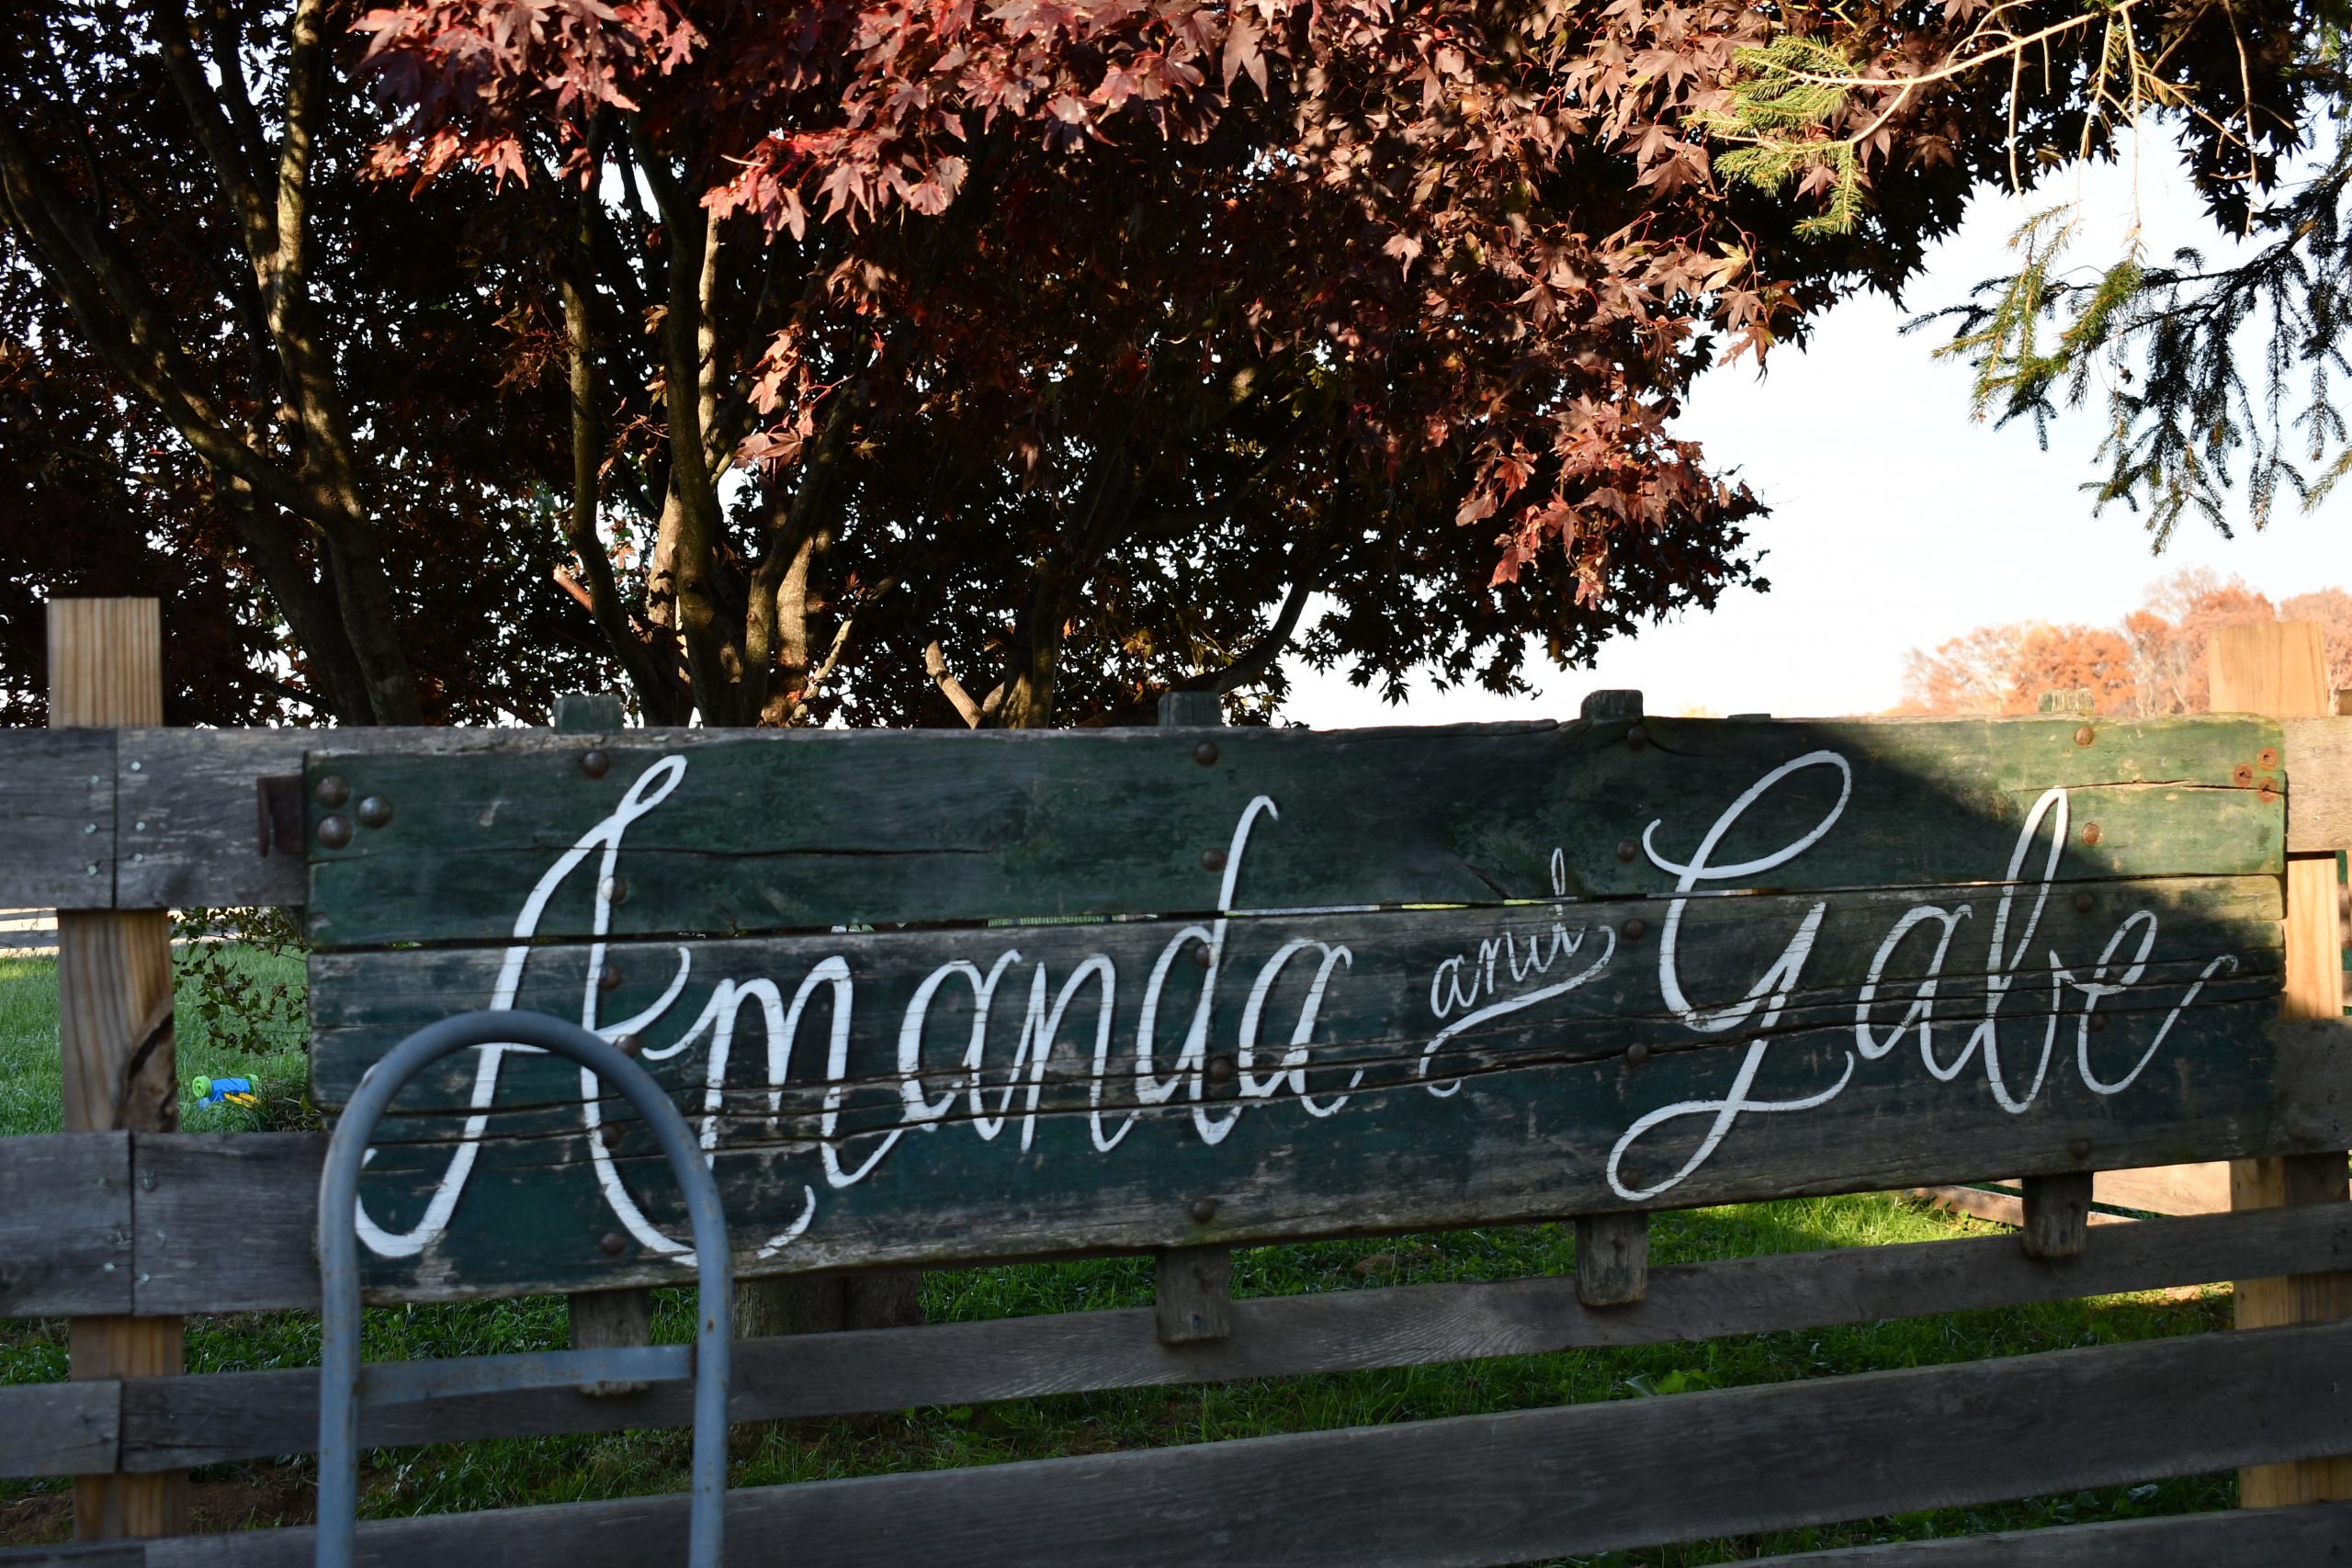 A photo of a hand-painted sign with white letters saying "Amanda and Gabe."